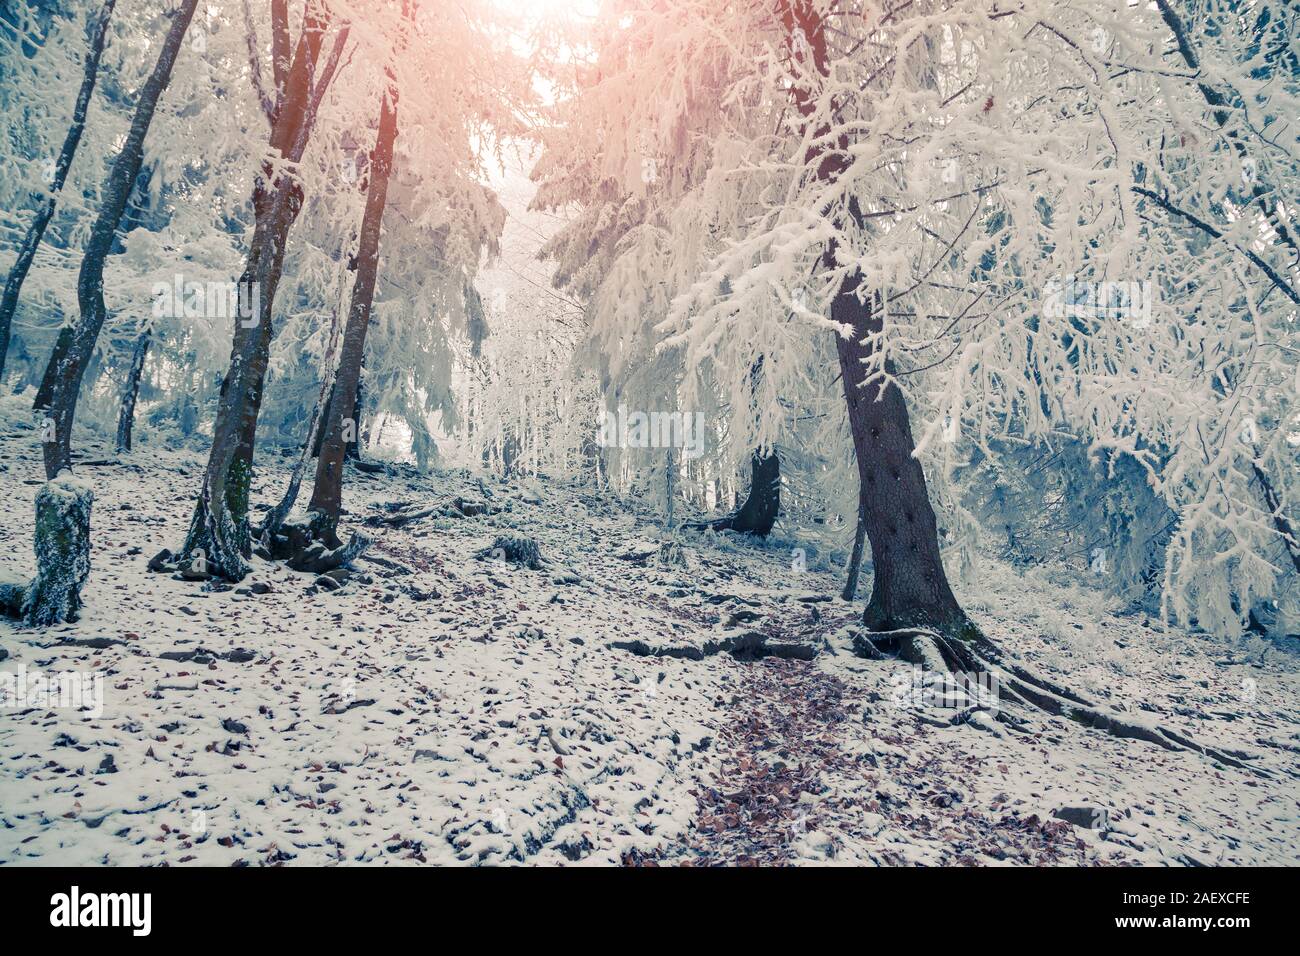 Colorful winter sunrise in the mountain forest. Retro style. Stock Photo